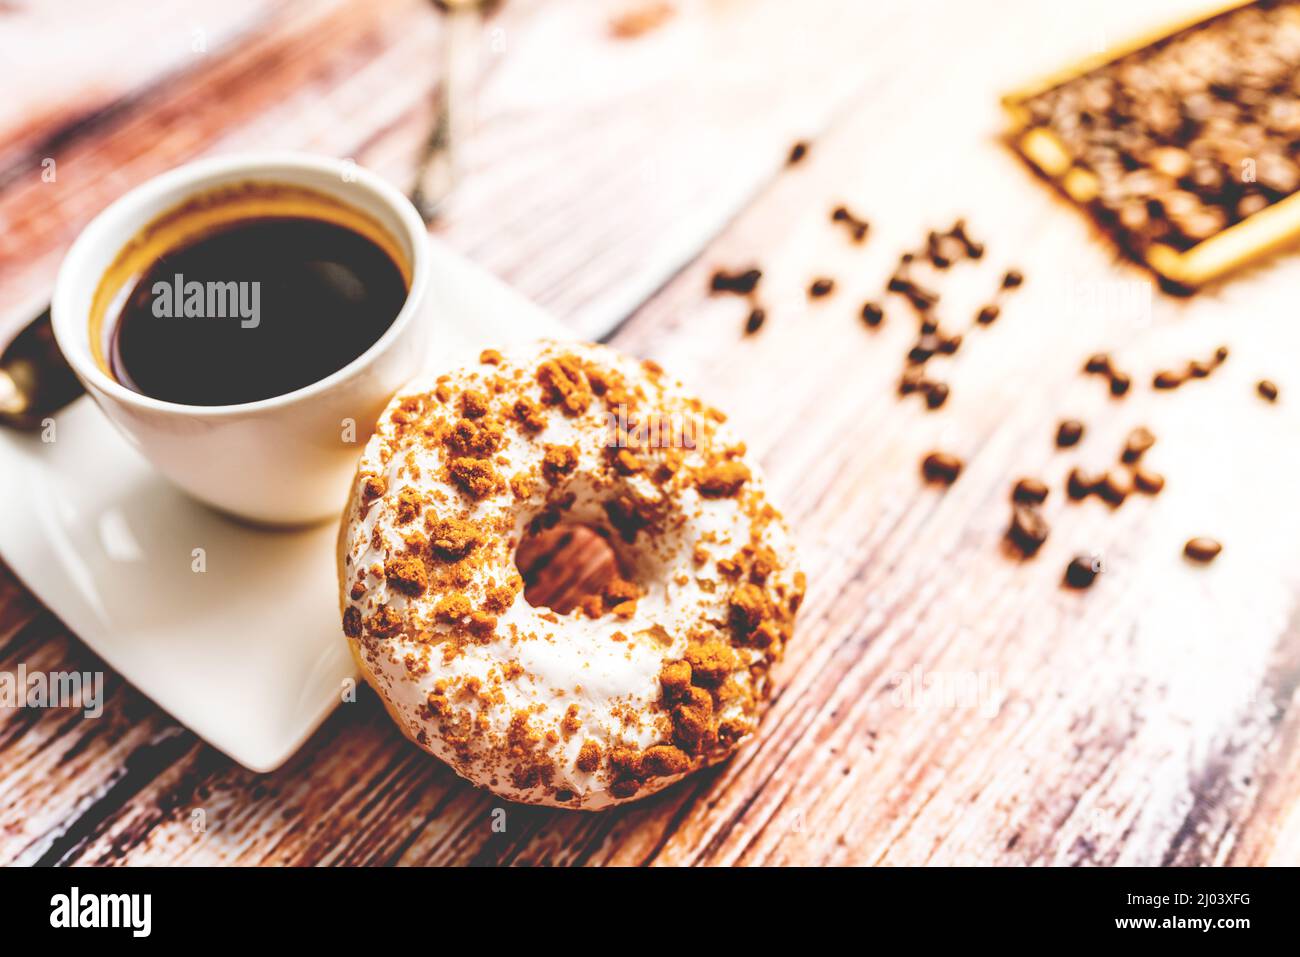 White donut with chocolate sprinkle and cup of coffee on wood table Stock Photo